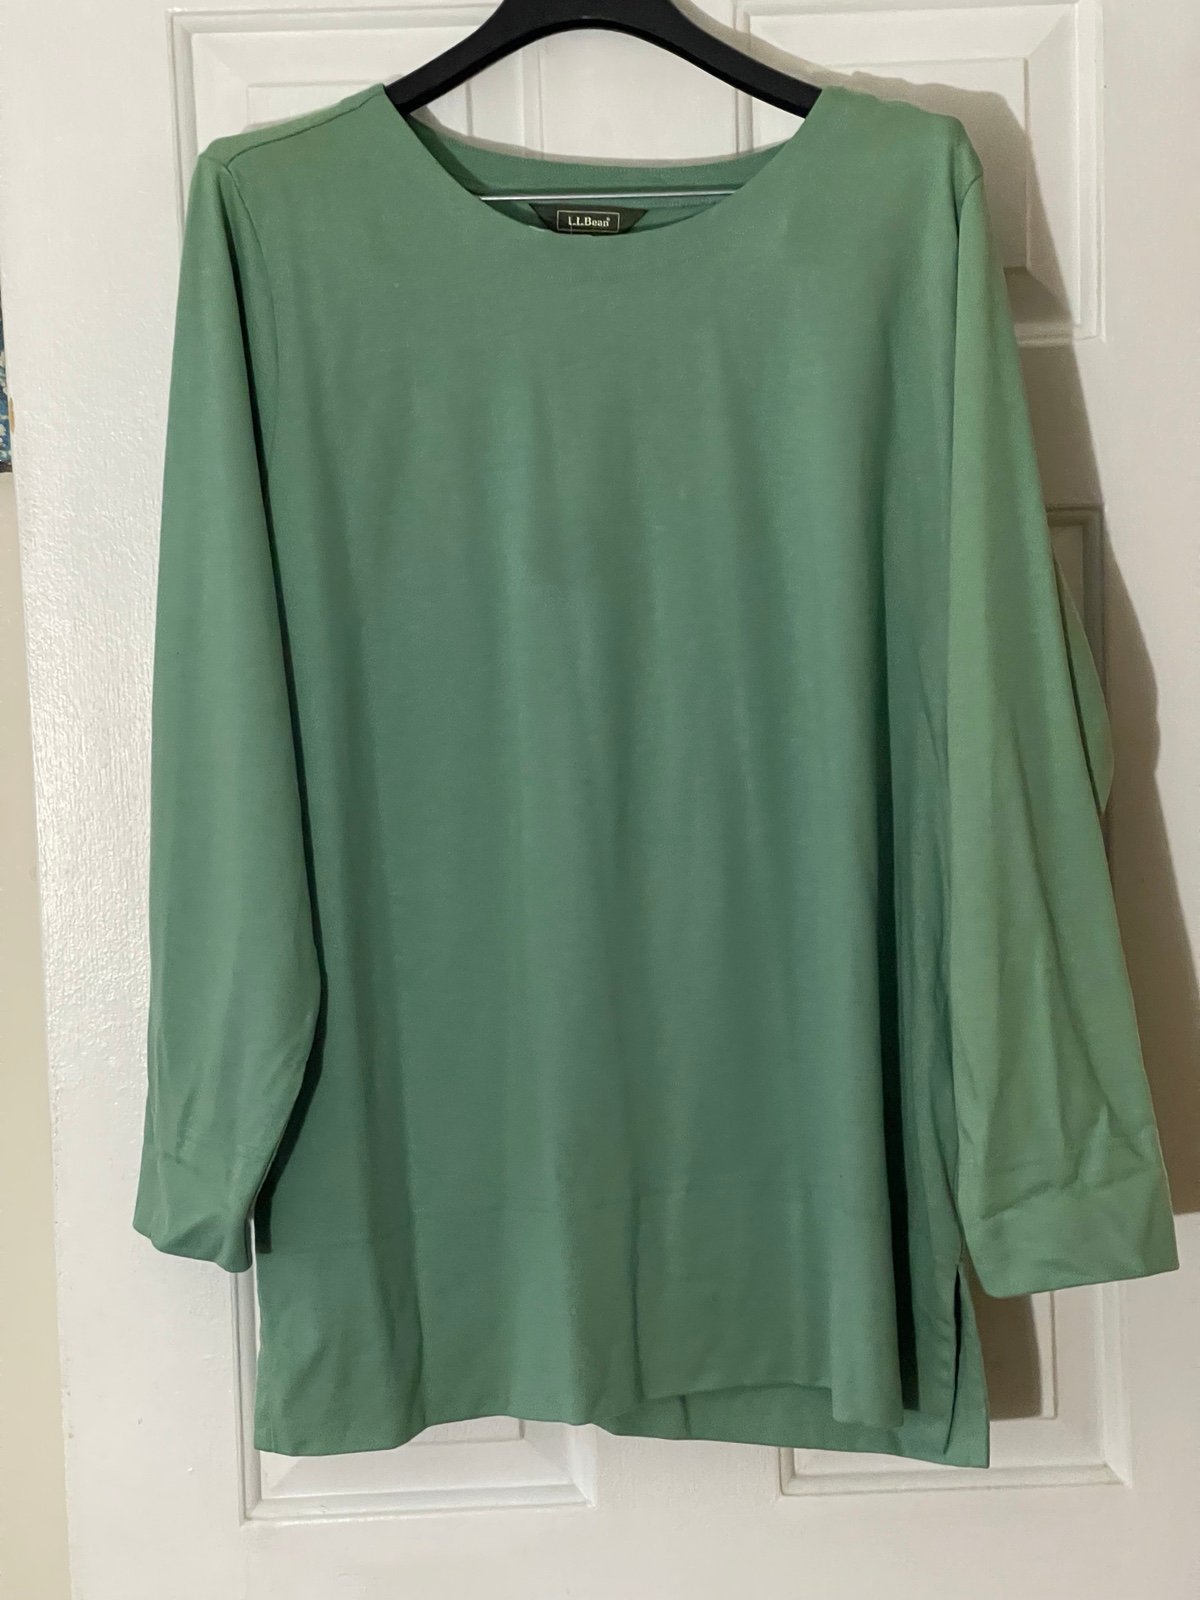 High quality L.L. Bean Woman’s Cotton Pullover New With Tags ! Size XL nPowuqa4V just for you